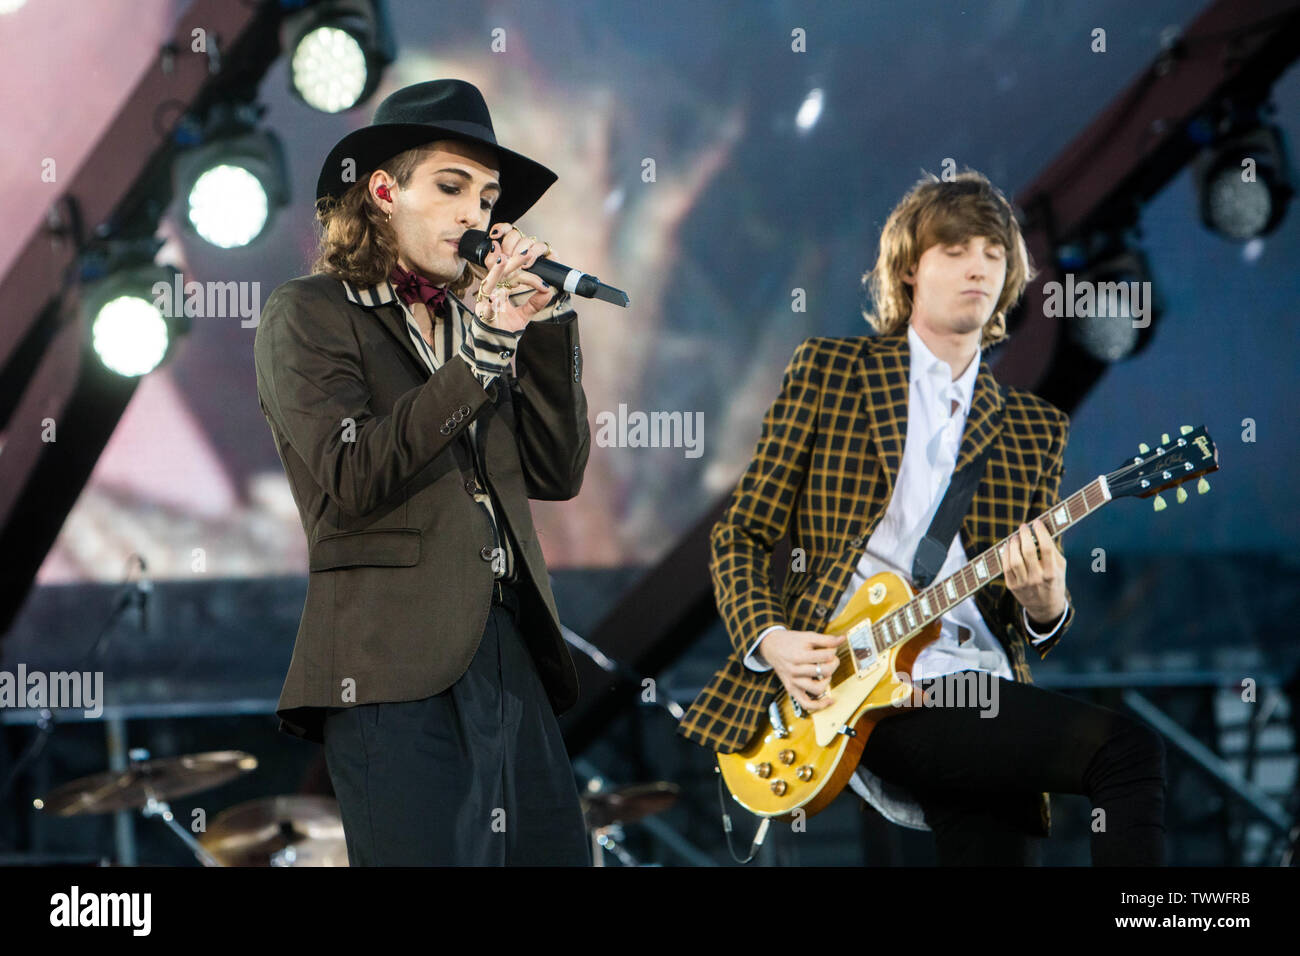 Damiano David, Thomas Raggi from Maneskin in concert at Party Like a Deejay - Radio Deejay party at Mind in Milano, Italy, on June 22 2019 Stock Photo